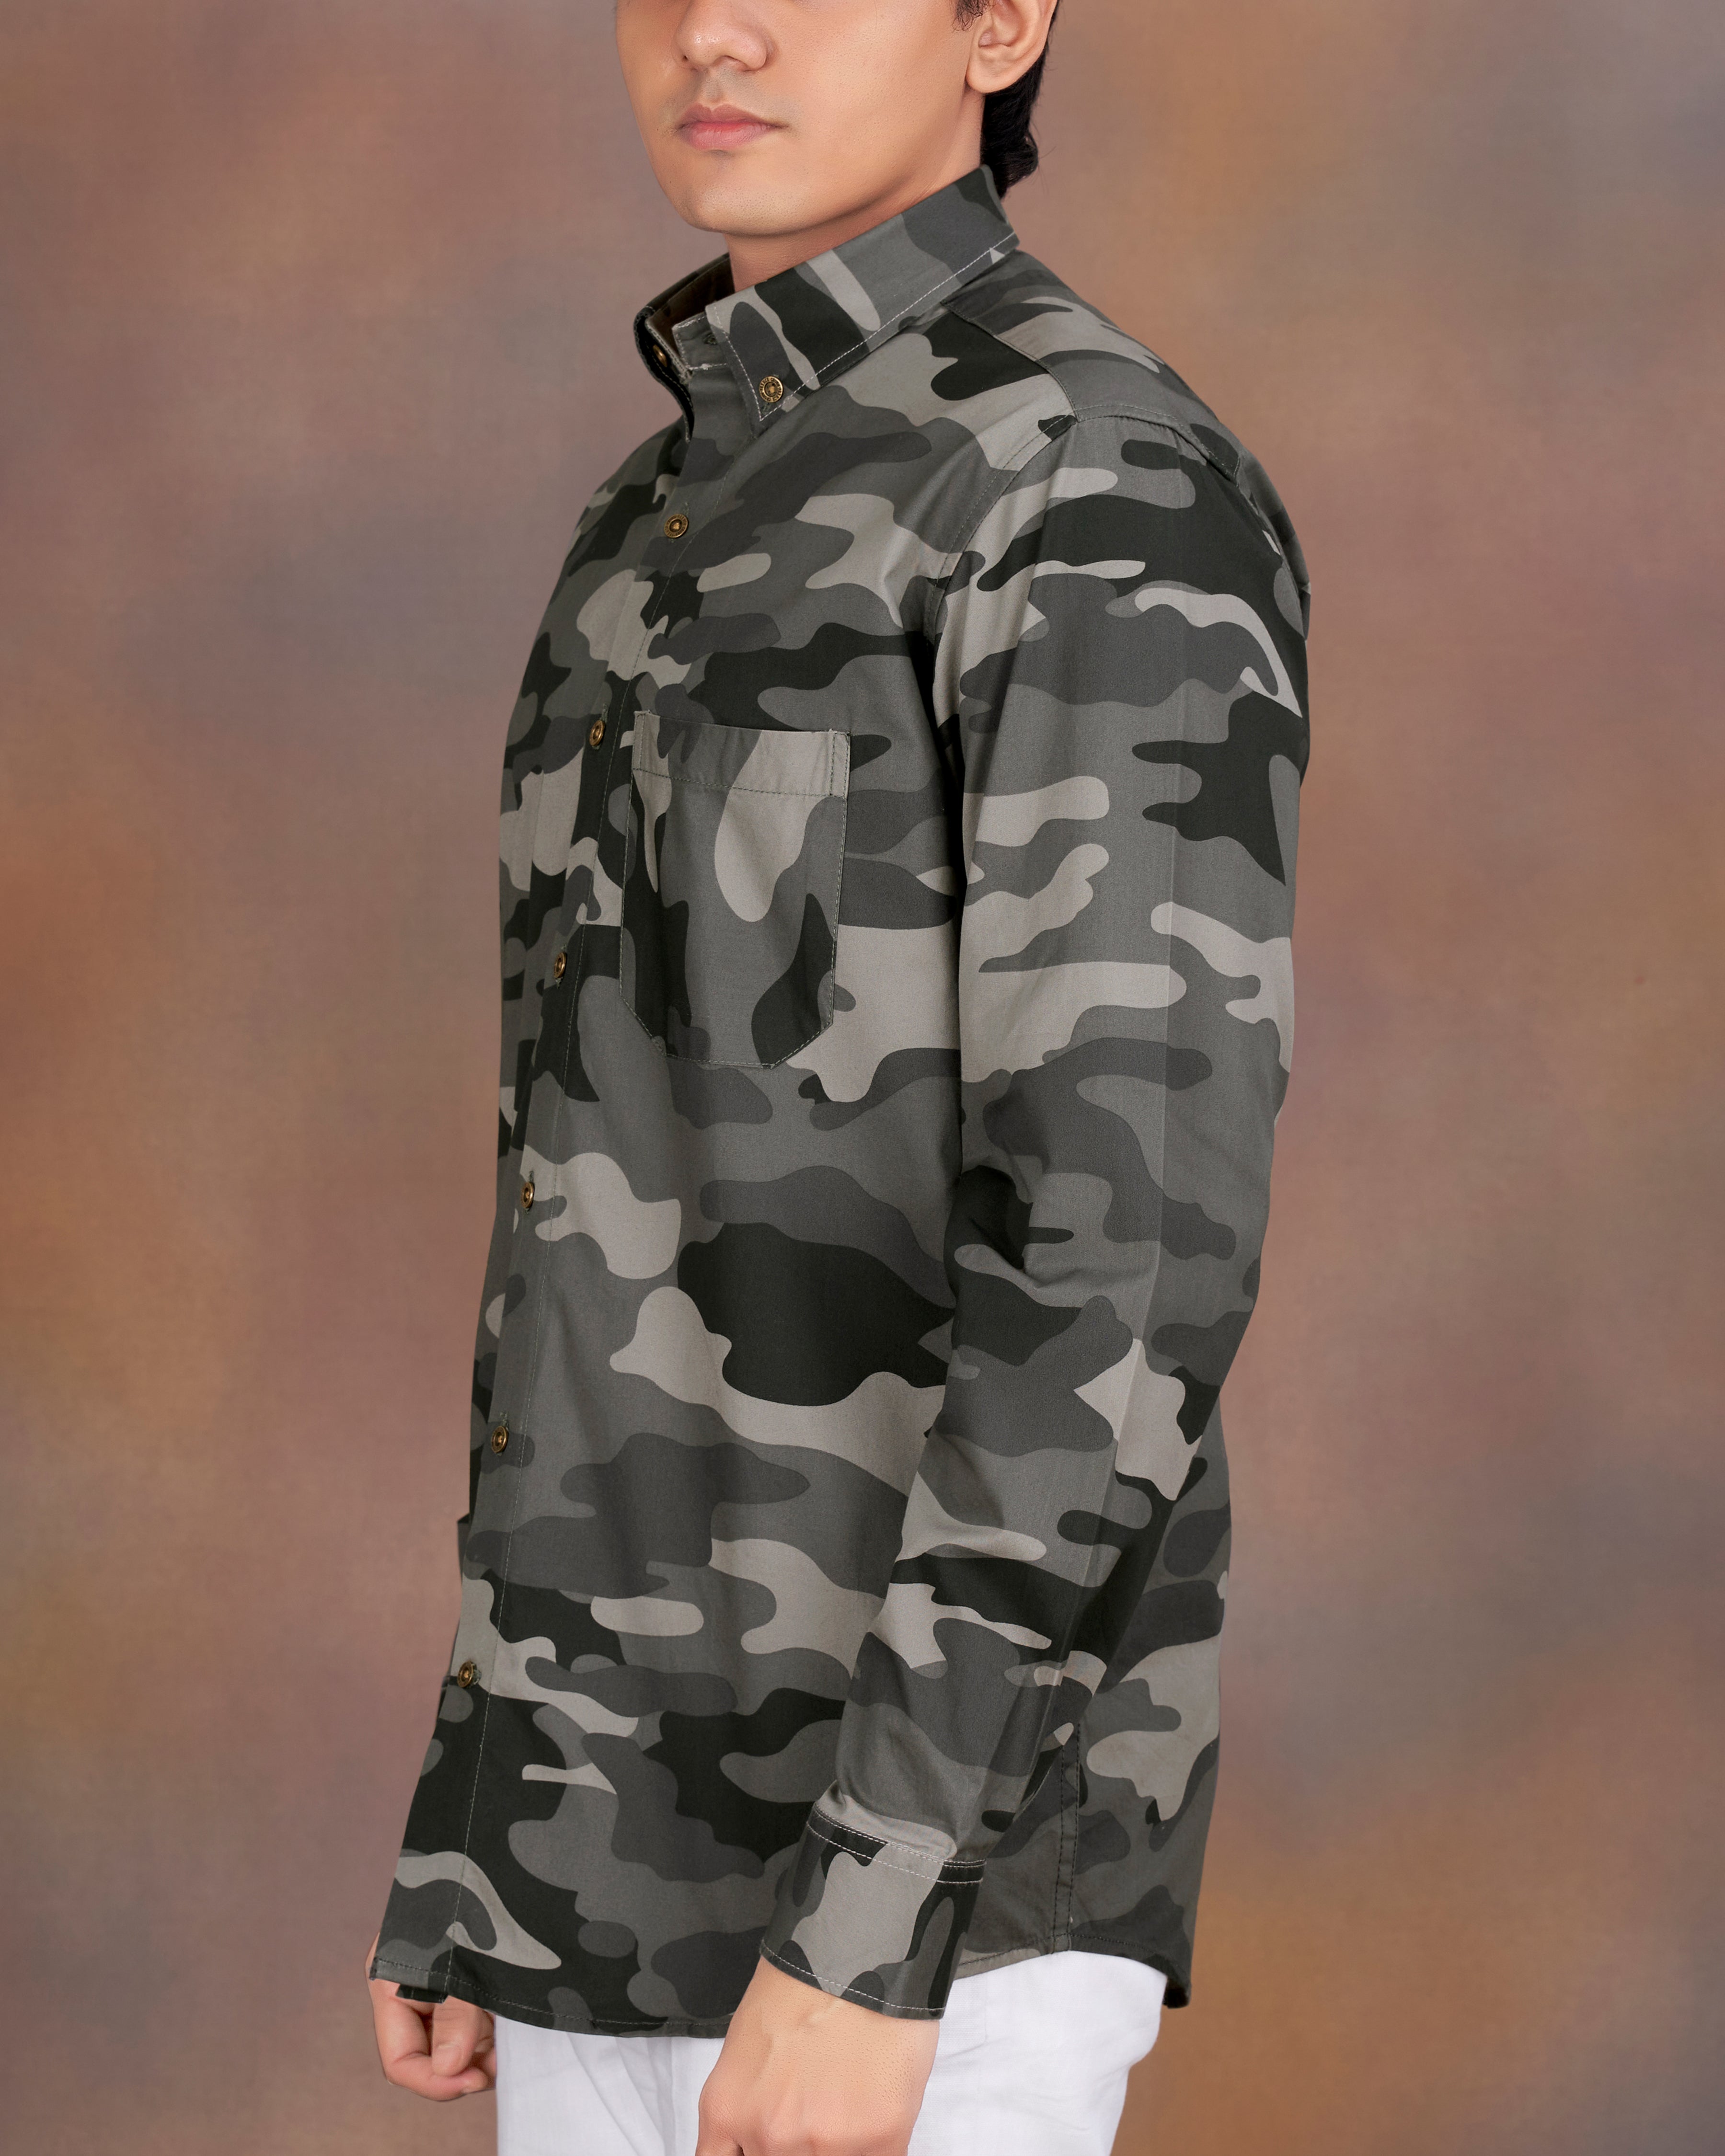 Ironside Gray with Baltic Black Camouflage Printed Royal Oxford Shirt